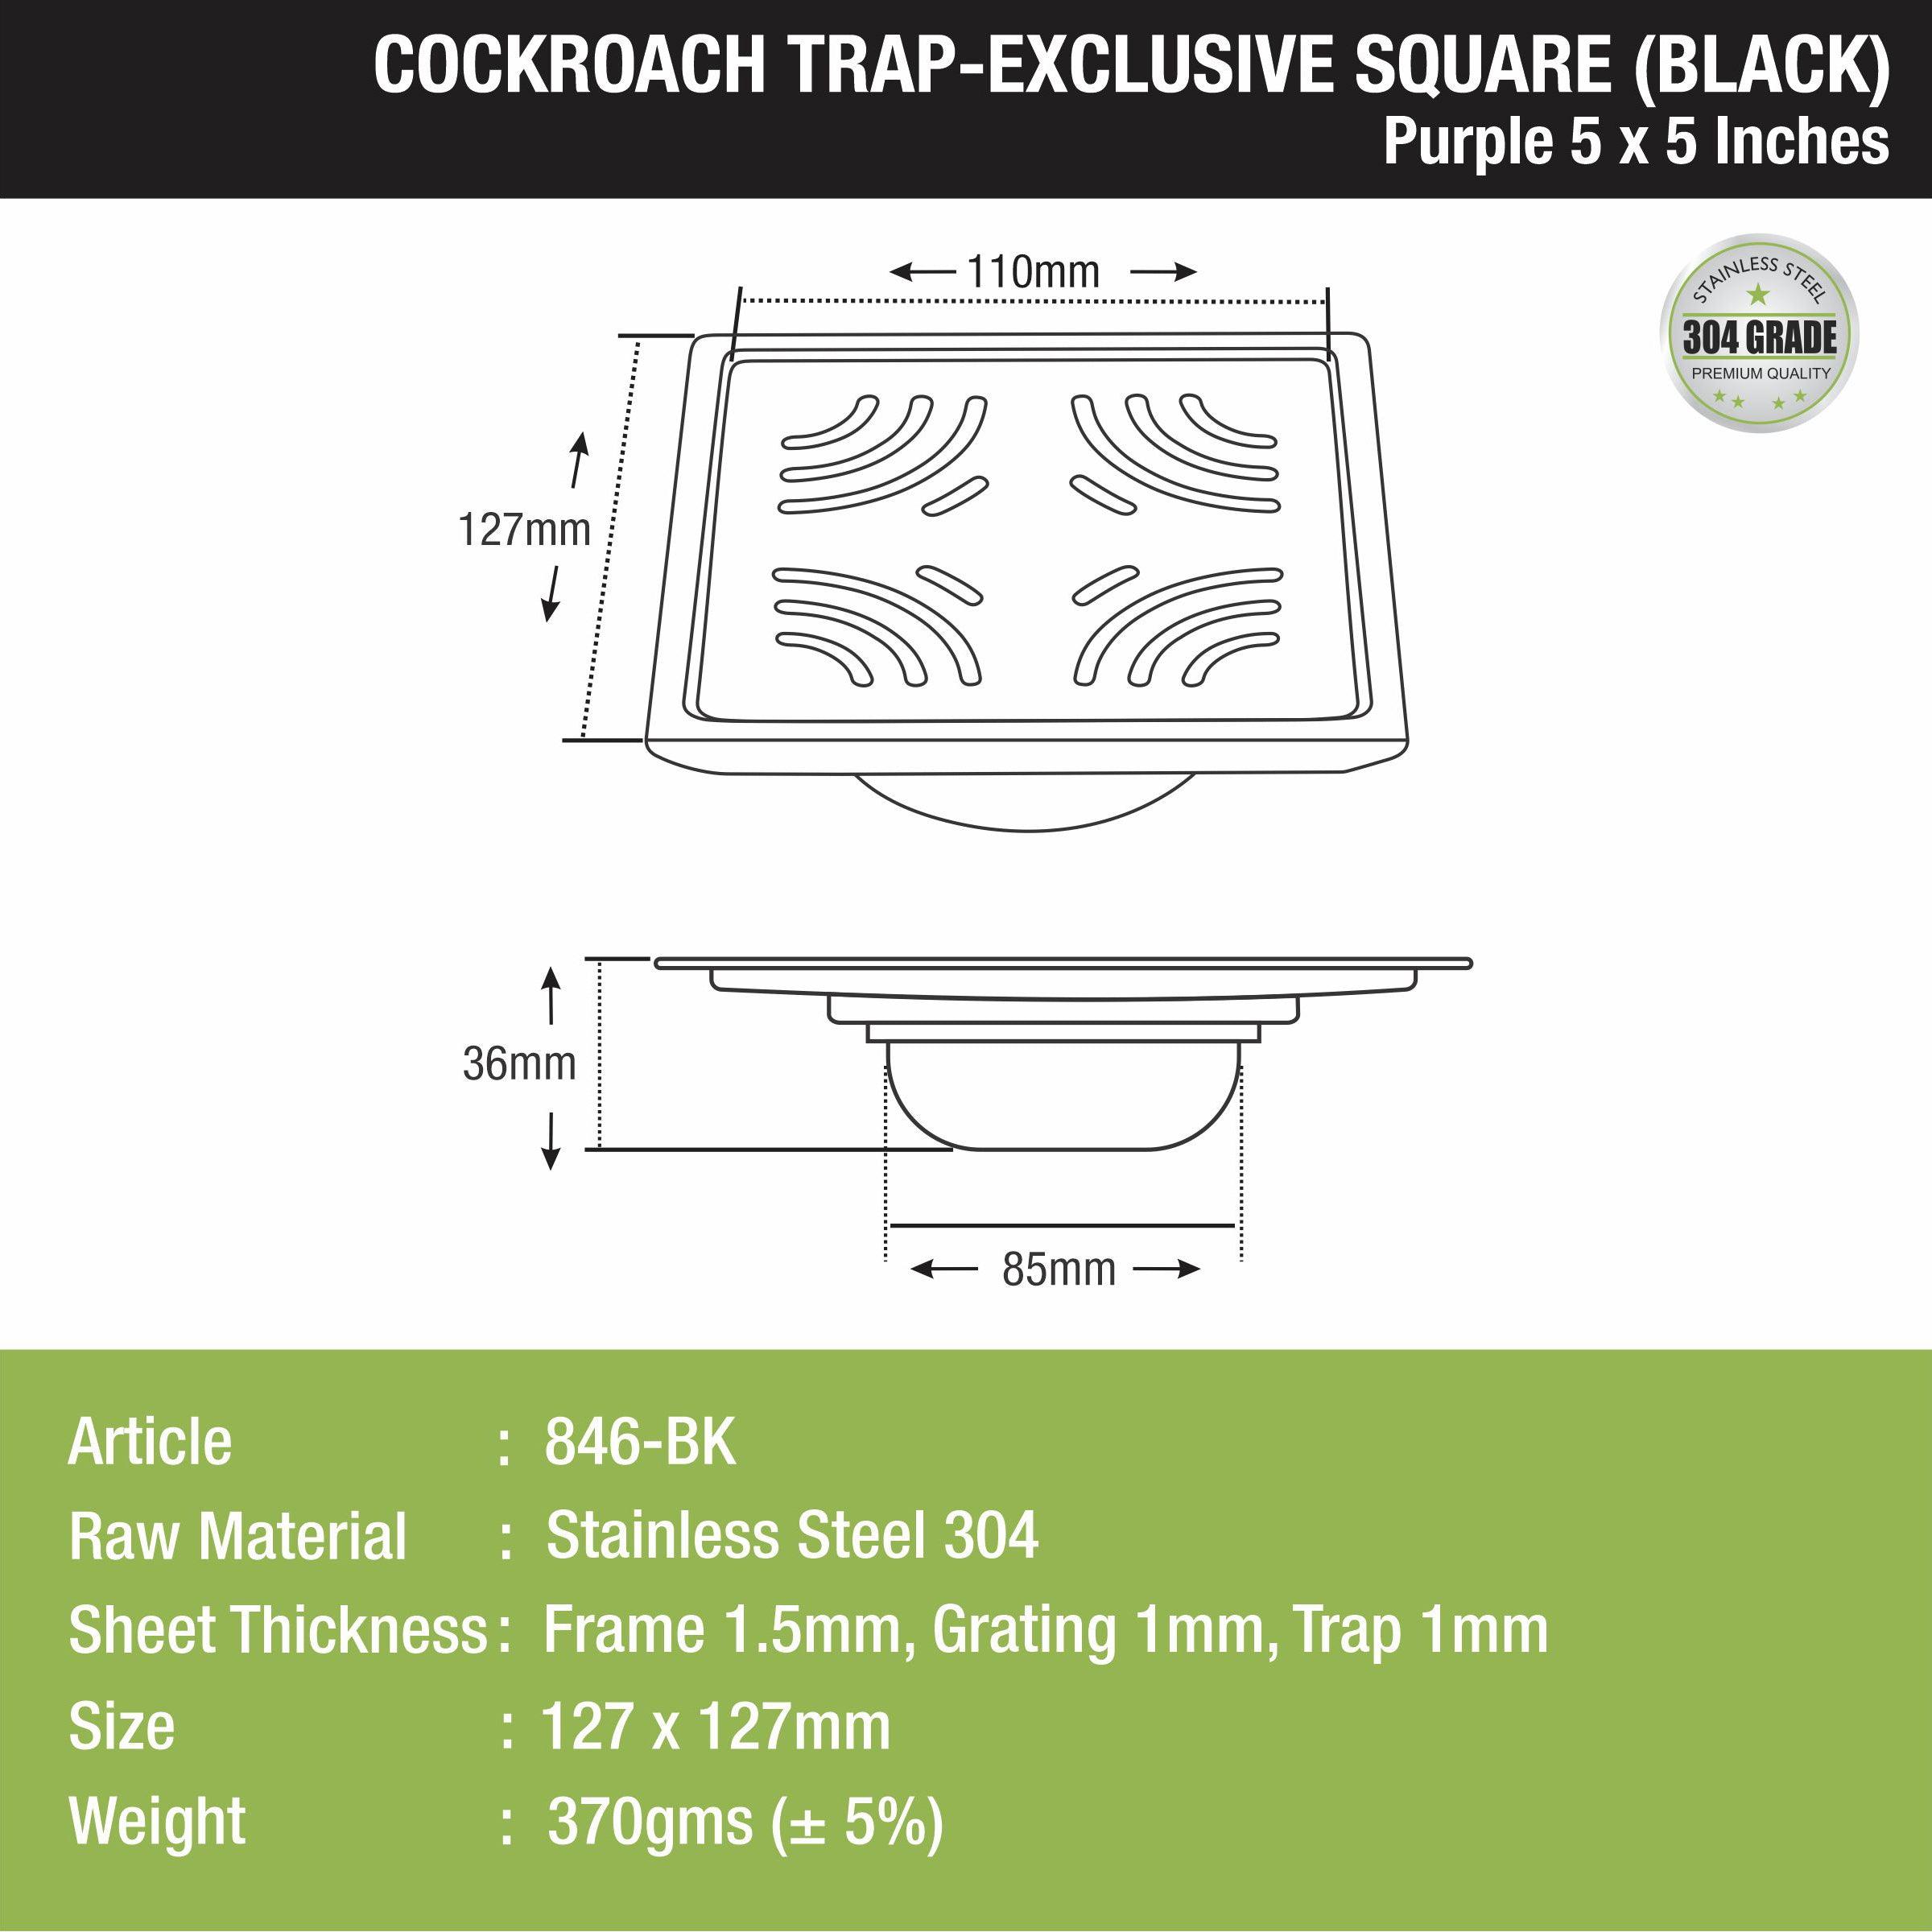 Purple Exclusive Square Floor Drain in Black PVD Coating (5 x 5 Inches) with Cockroach Trap size and measurement 